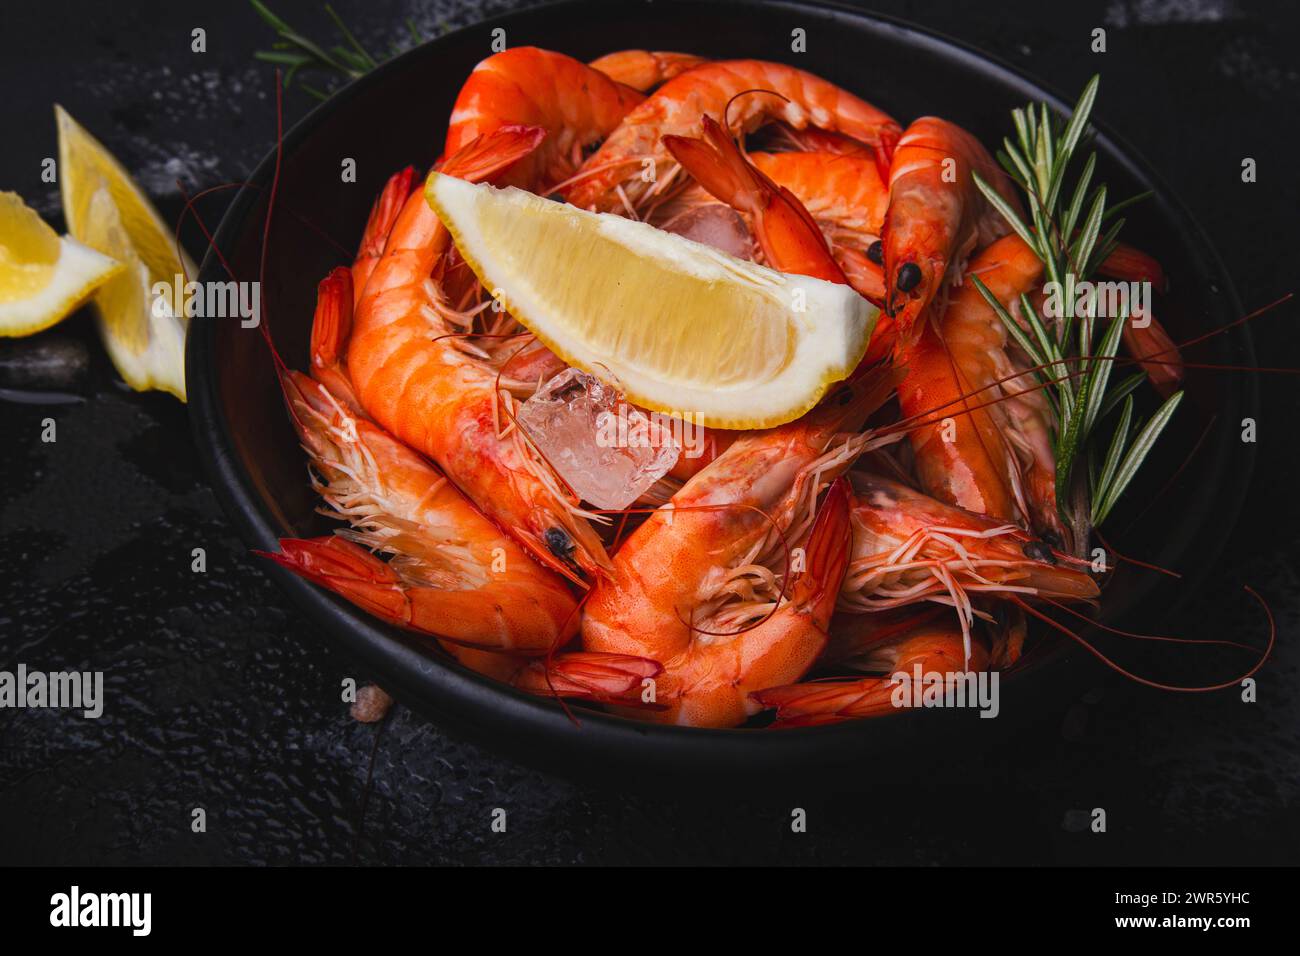 Appetizing prawns with lemon and herbs, presented for gourmet recipes or healthy eating guides. Stock Photo